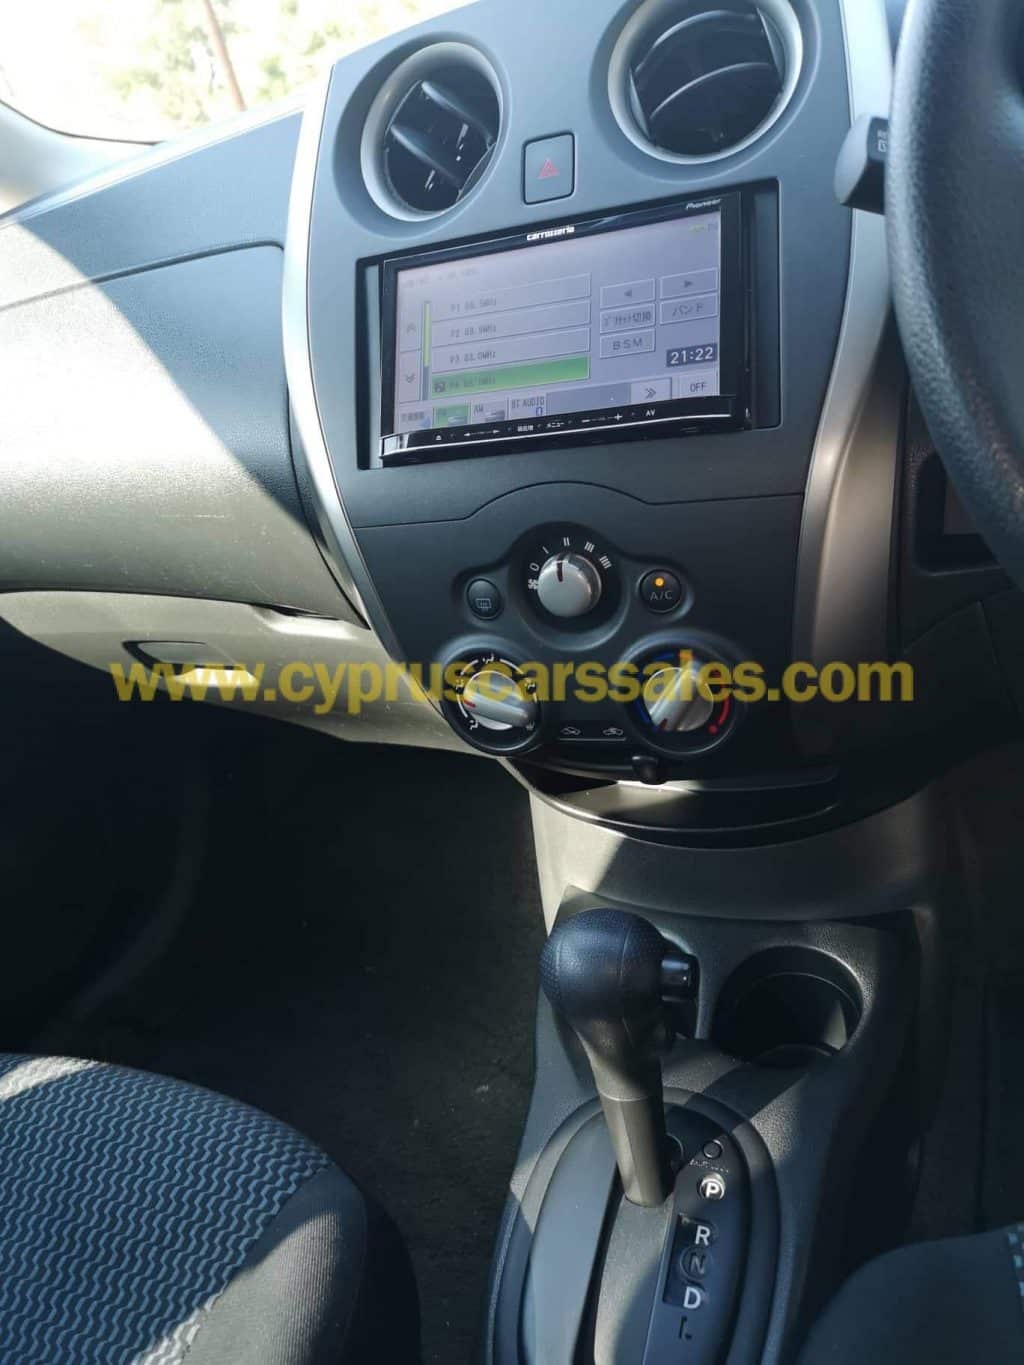 Nissan Note • Cyprus Cars Sales